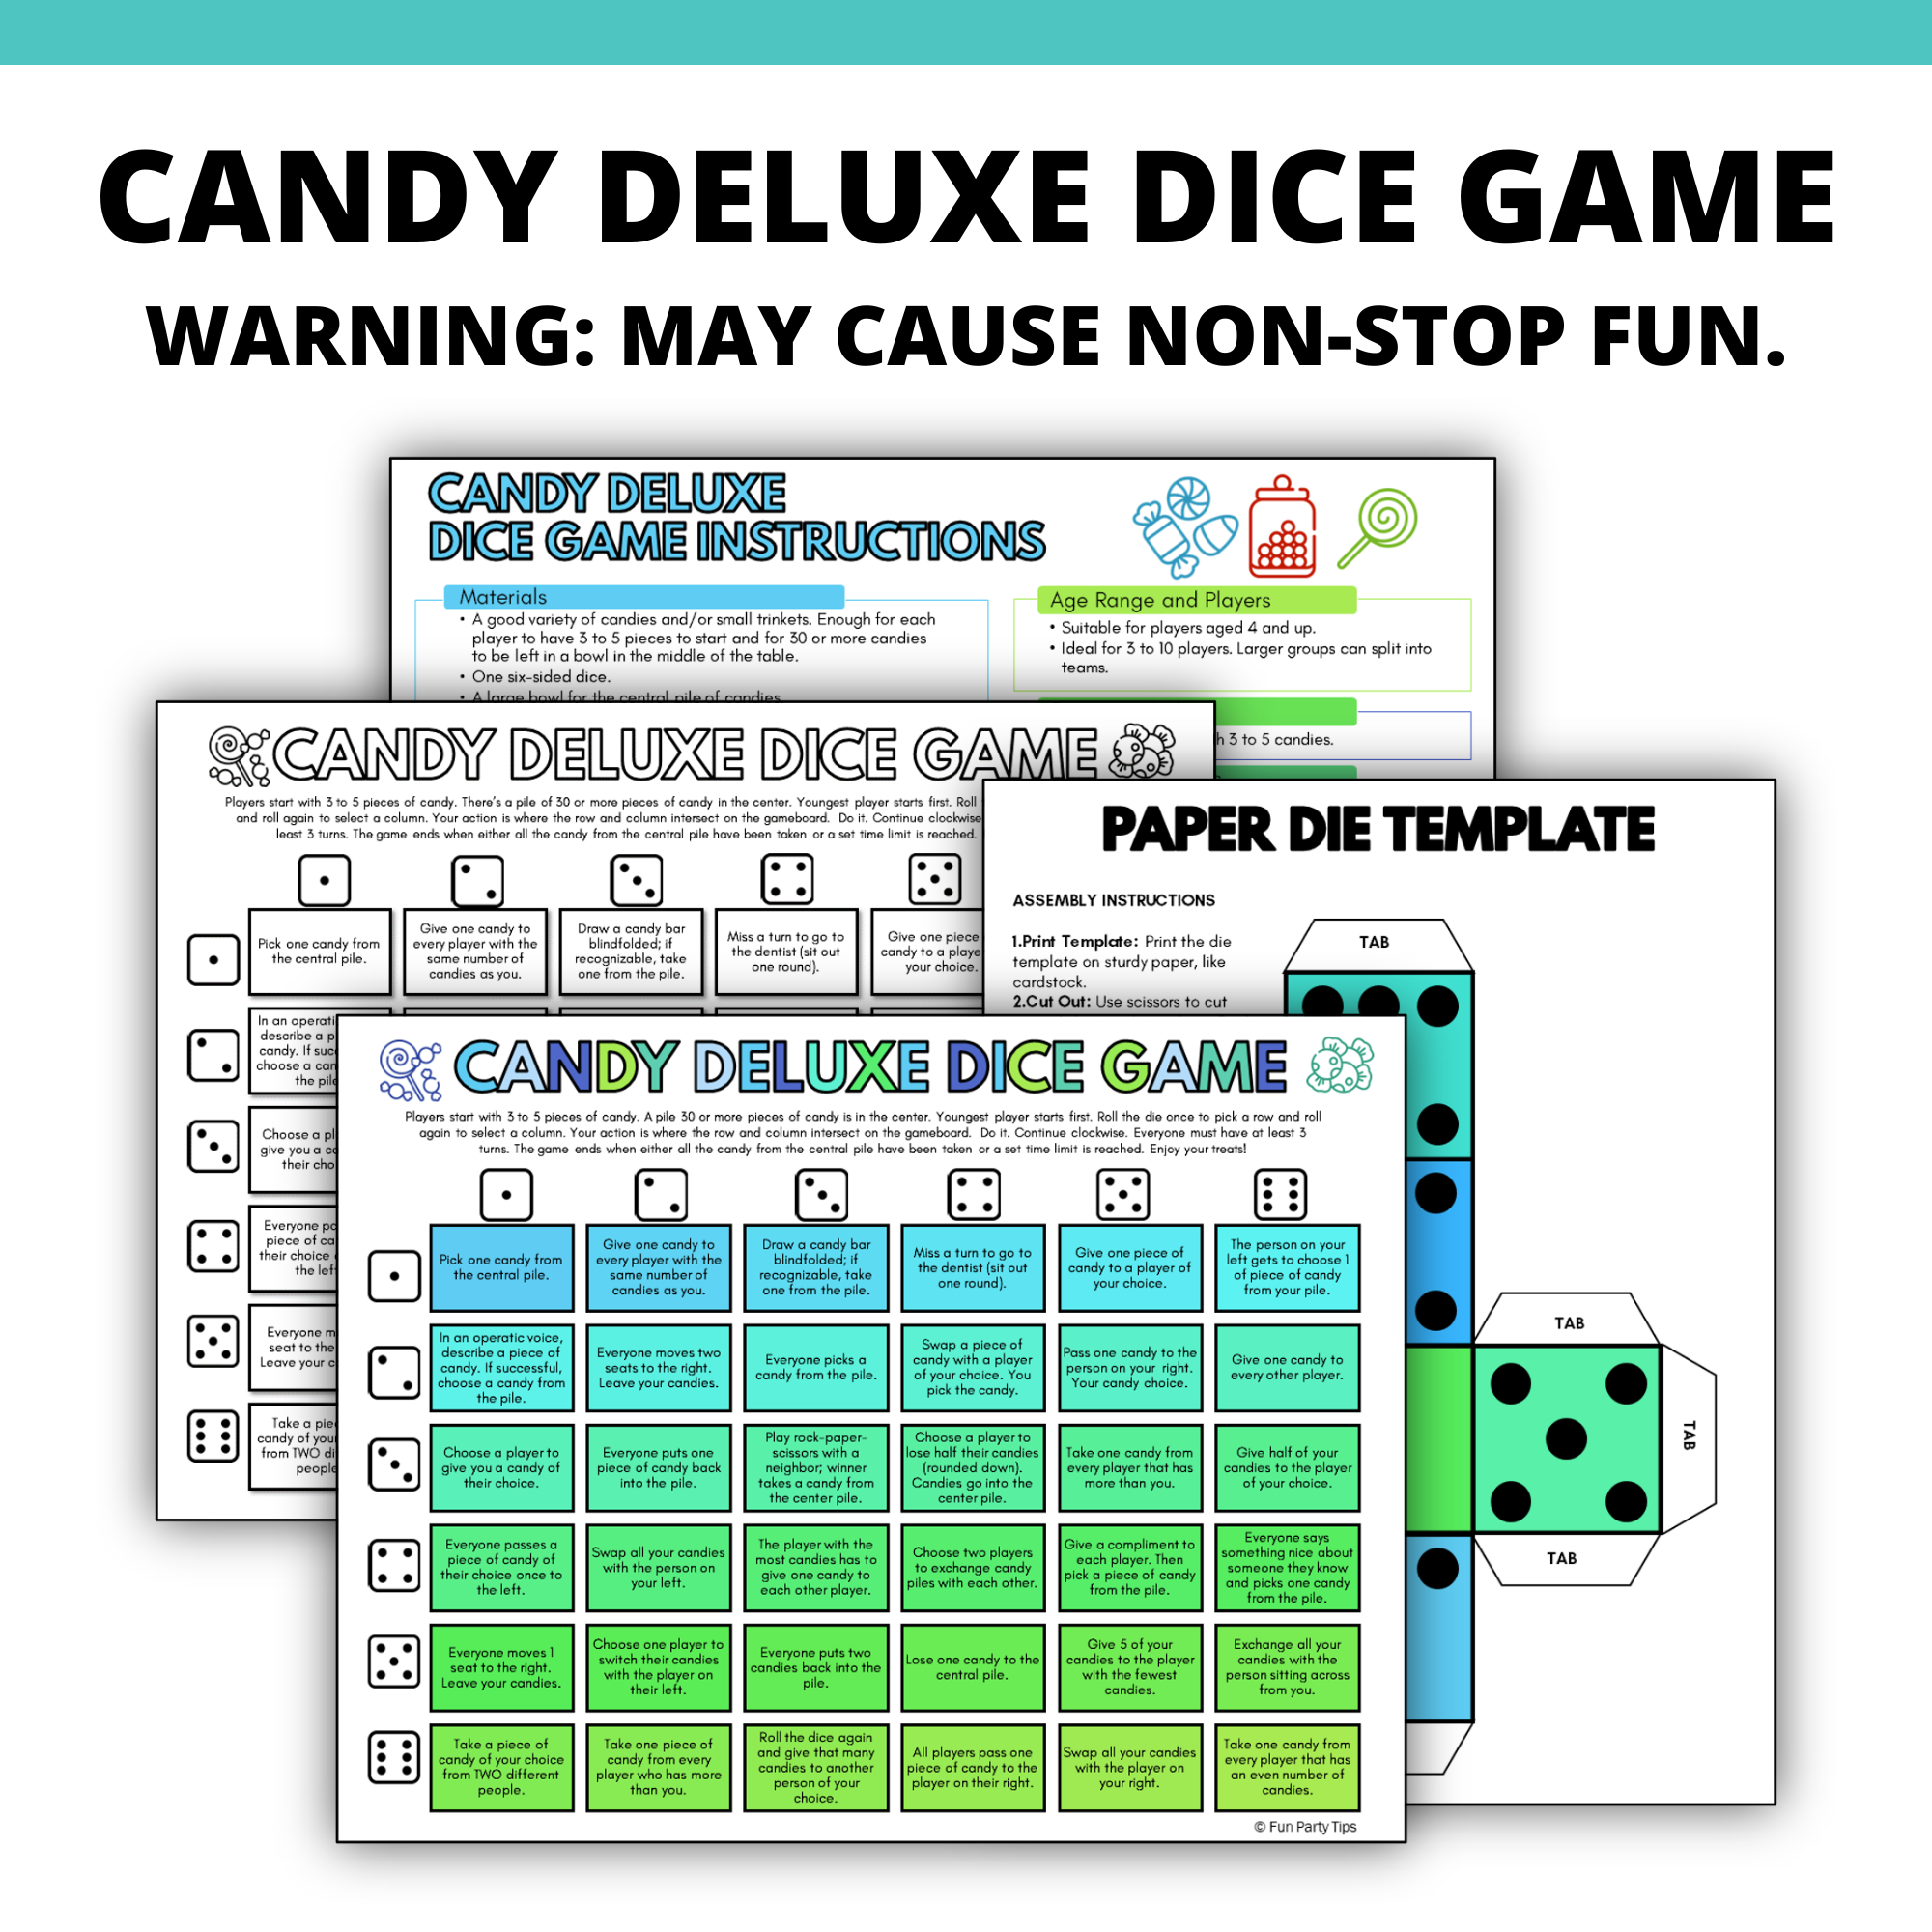 a mockup of the Candy Deluxe Dice Game